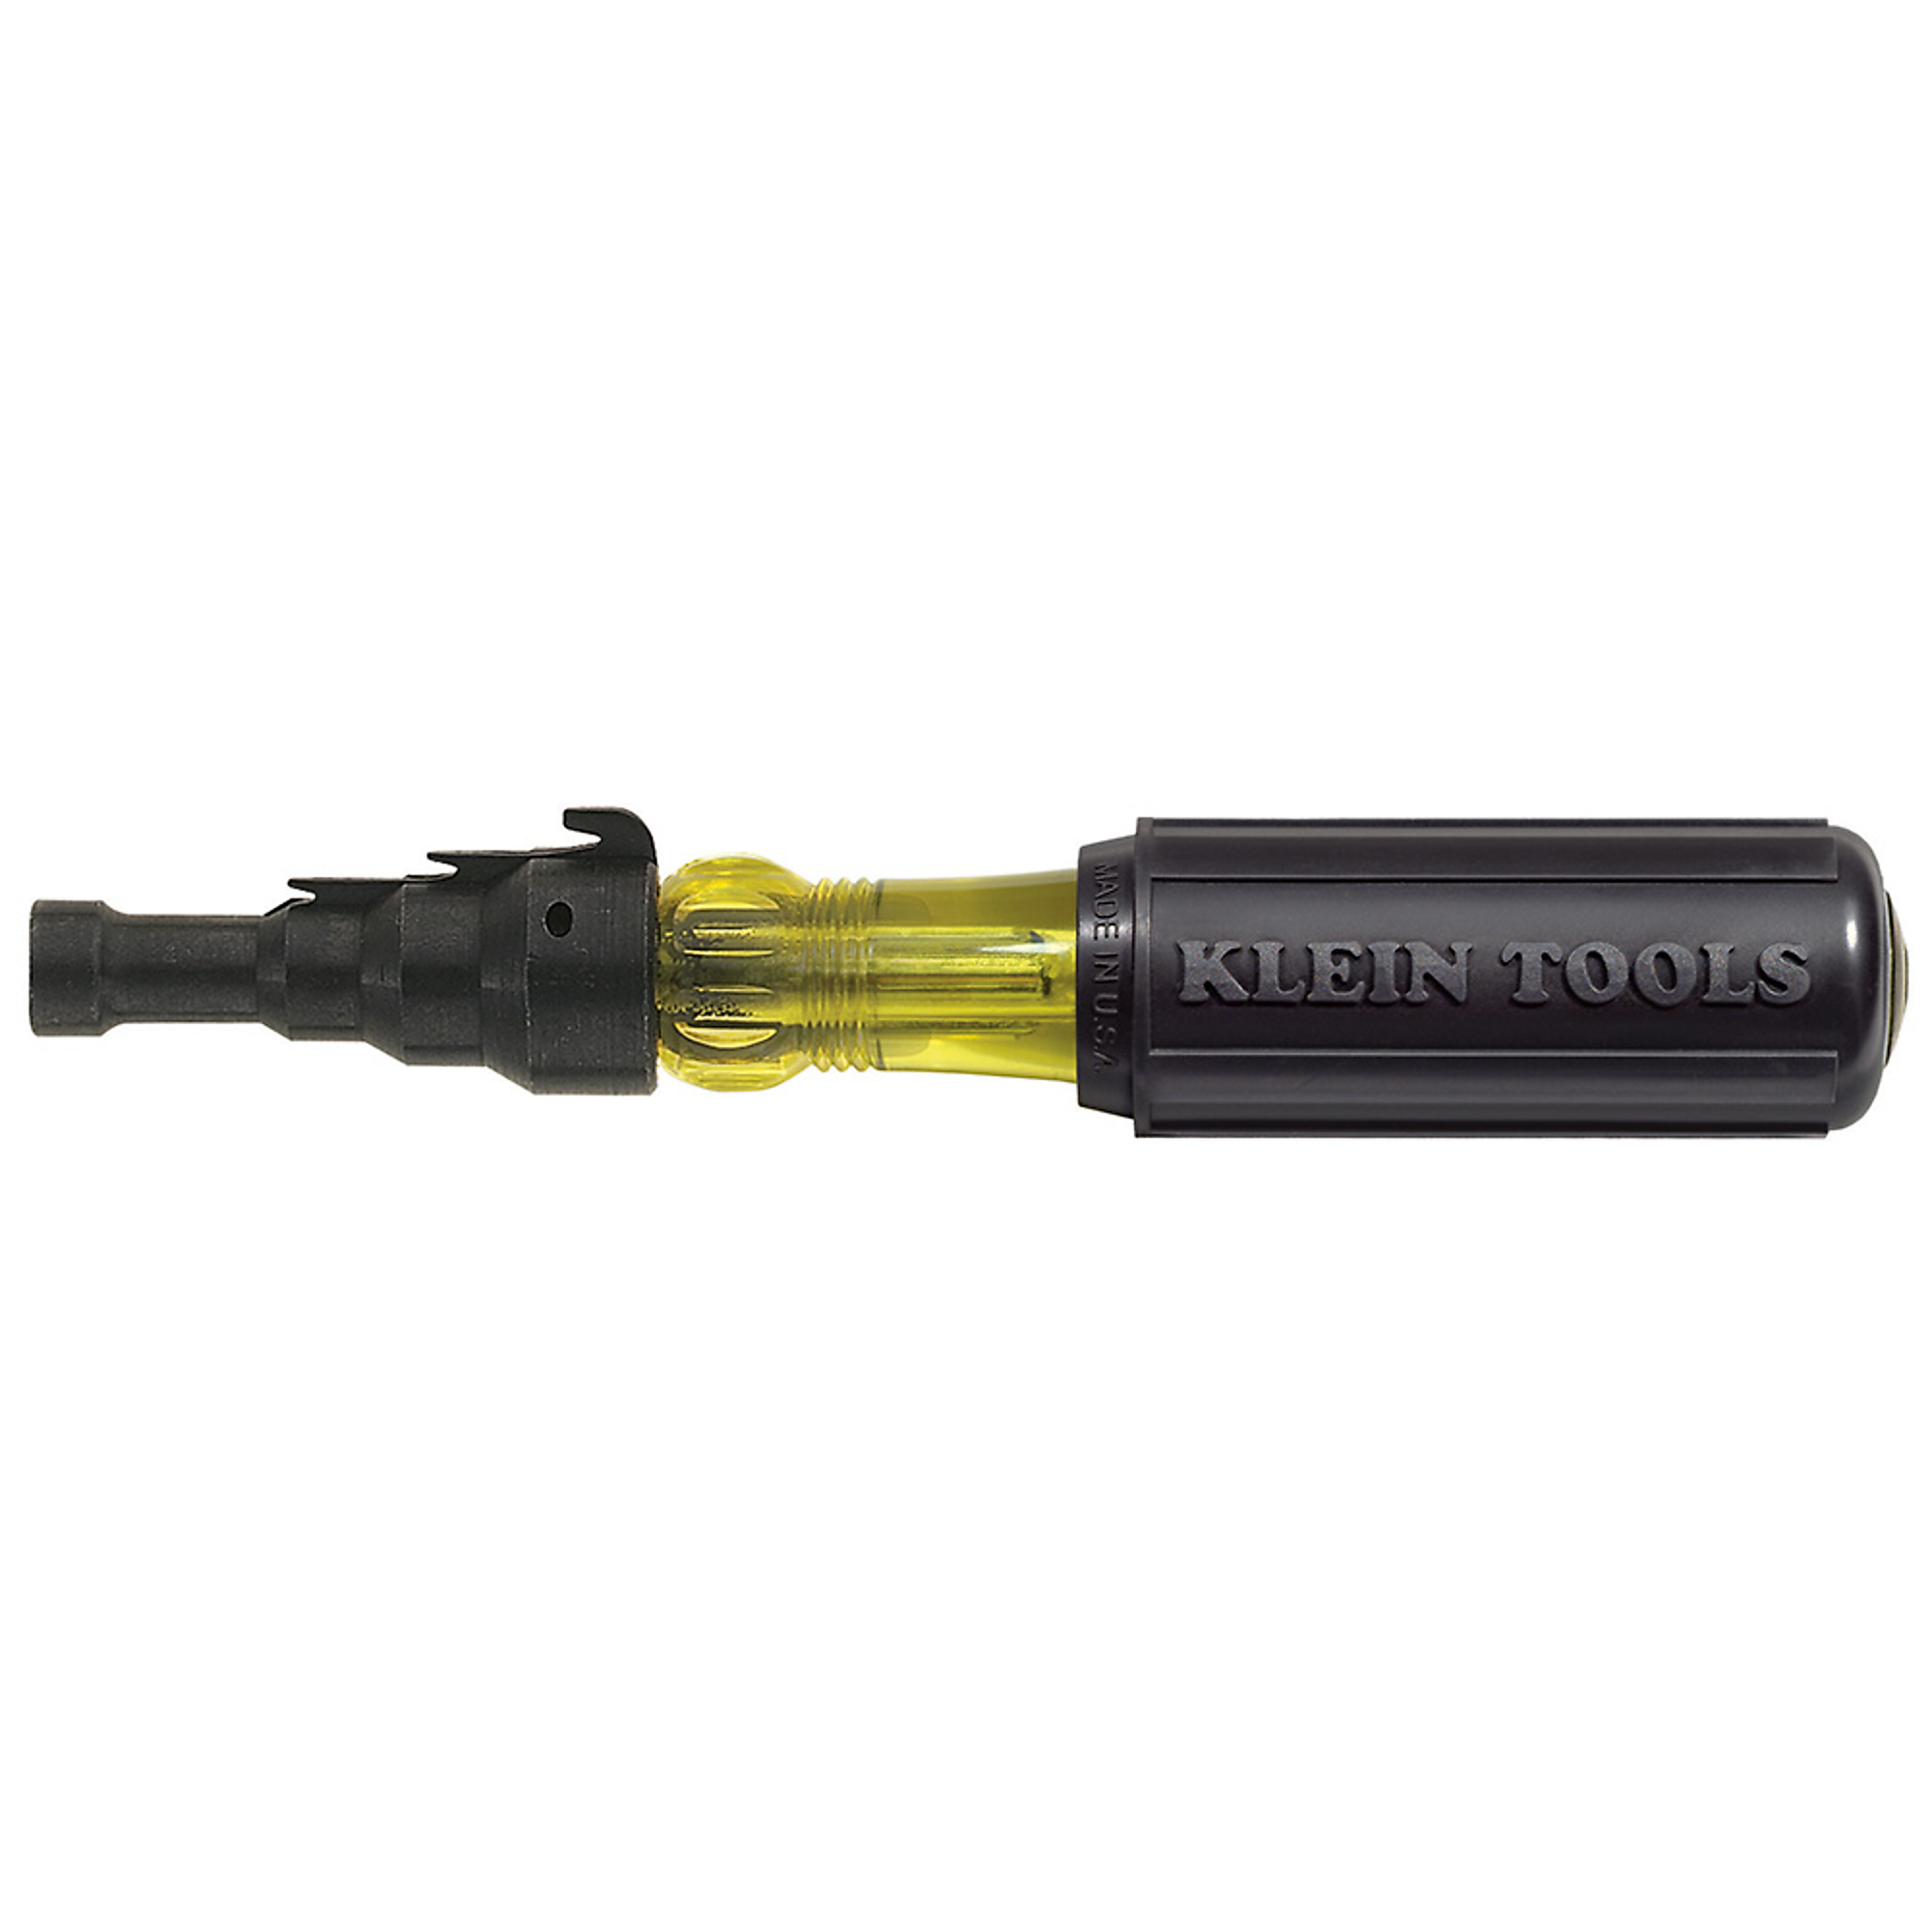 Klein Tools, Conduit Fitting and Reaming Screwdriver, Drive Type Slotted, Model 85191